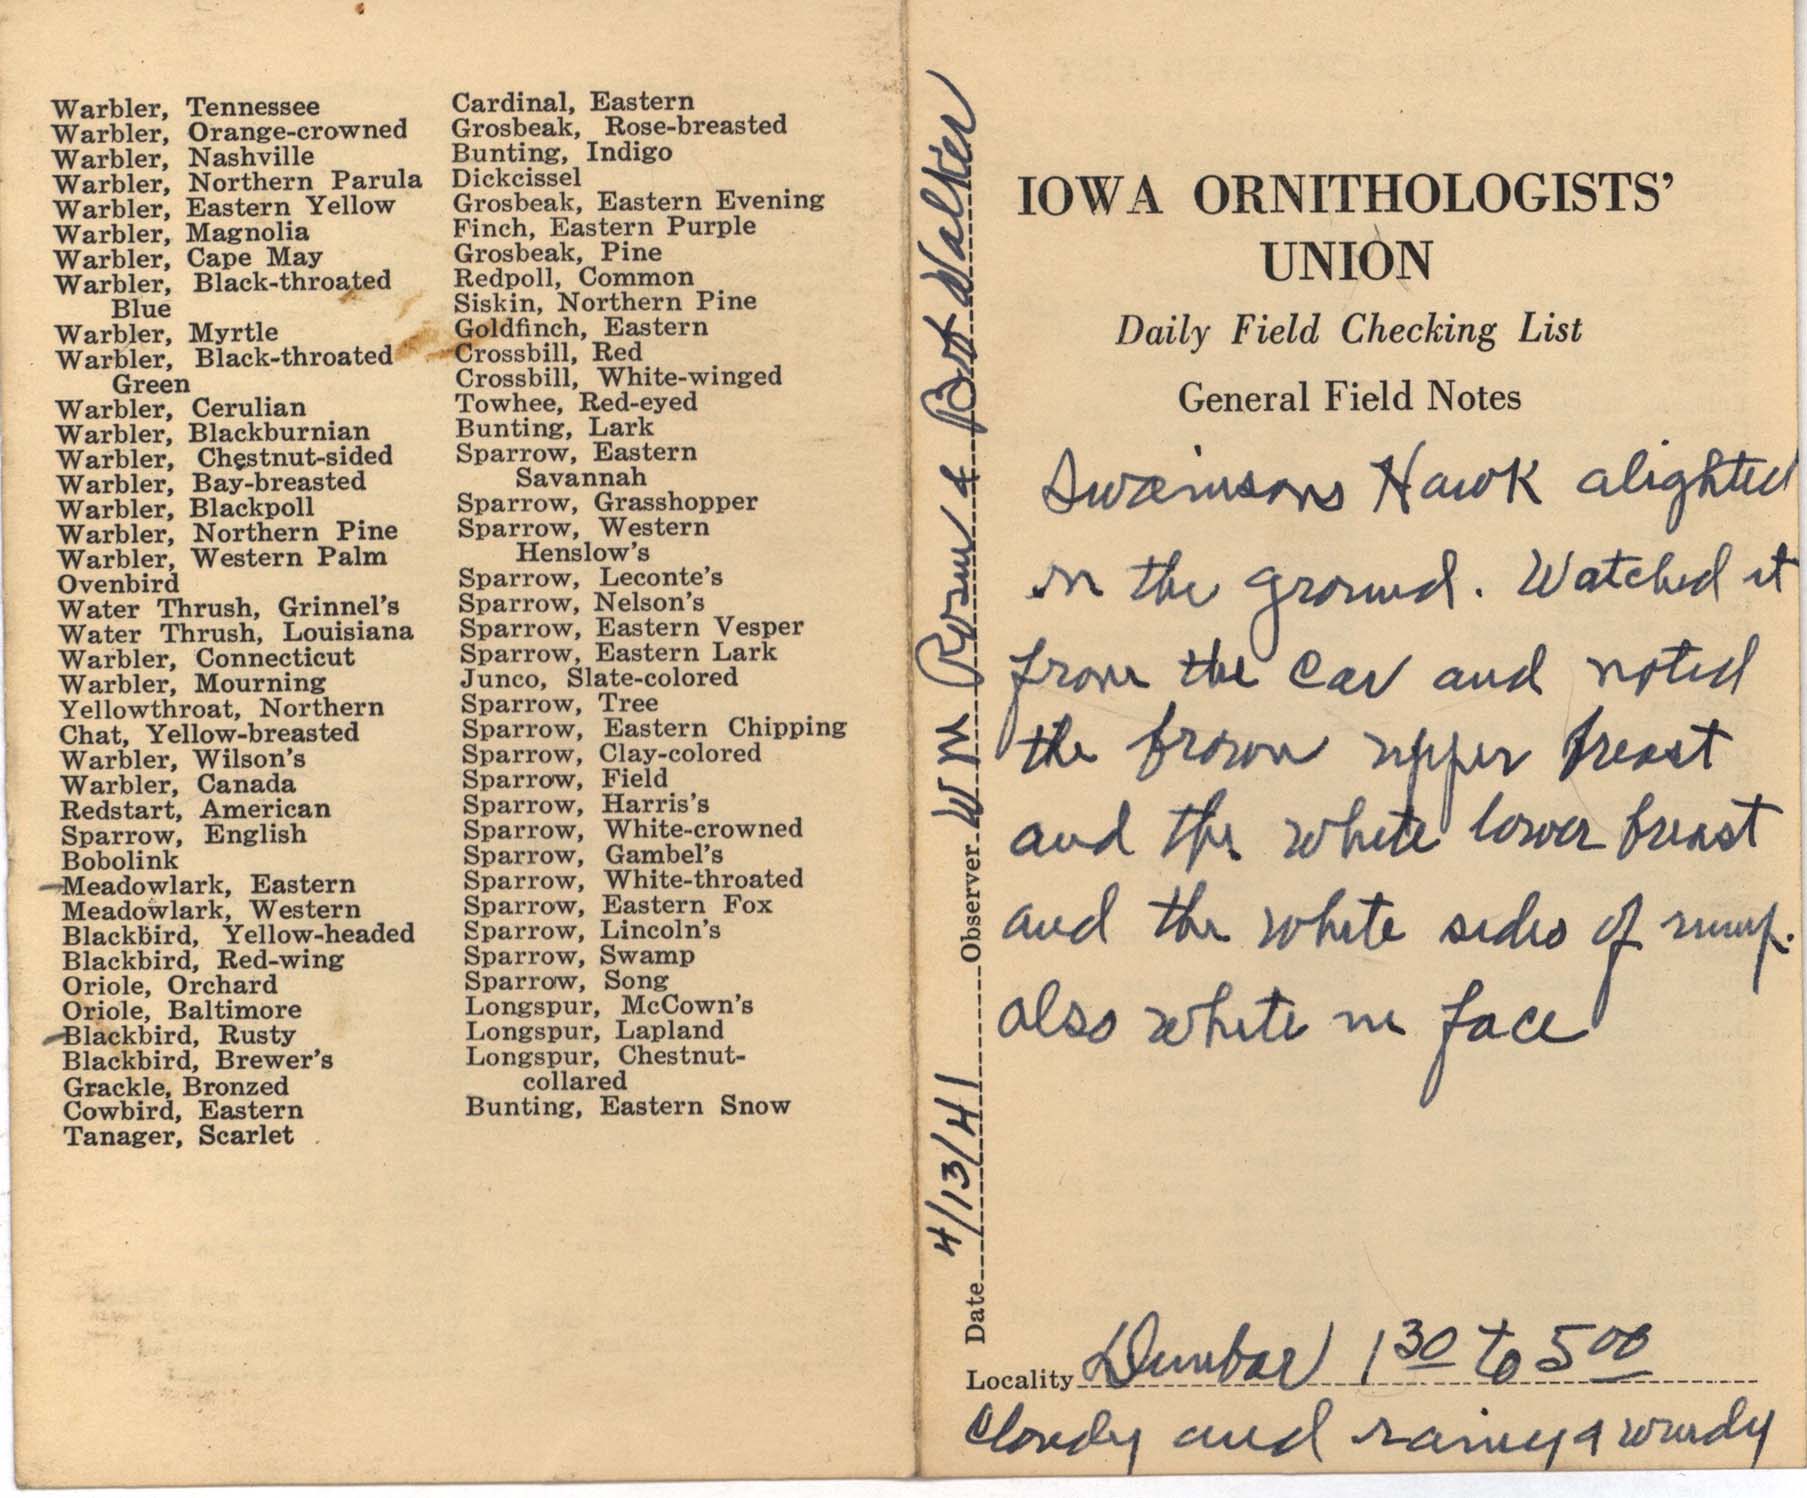 Daily field checking list by Walter Rosene, April 13, 1941